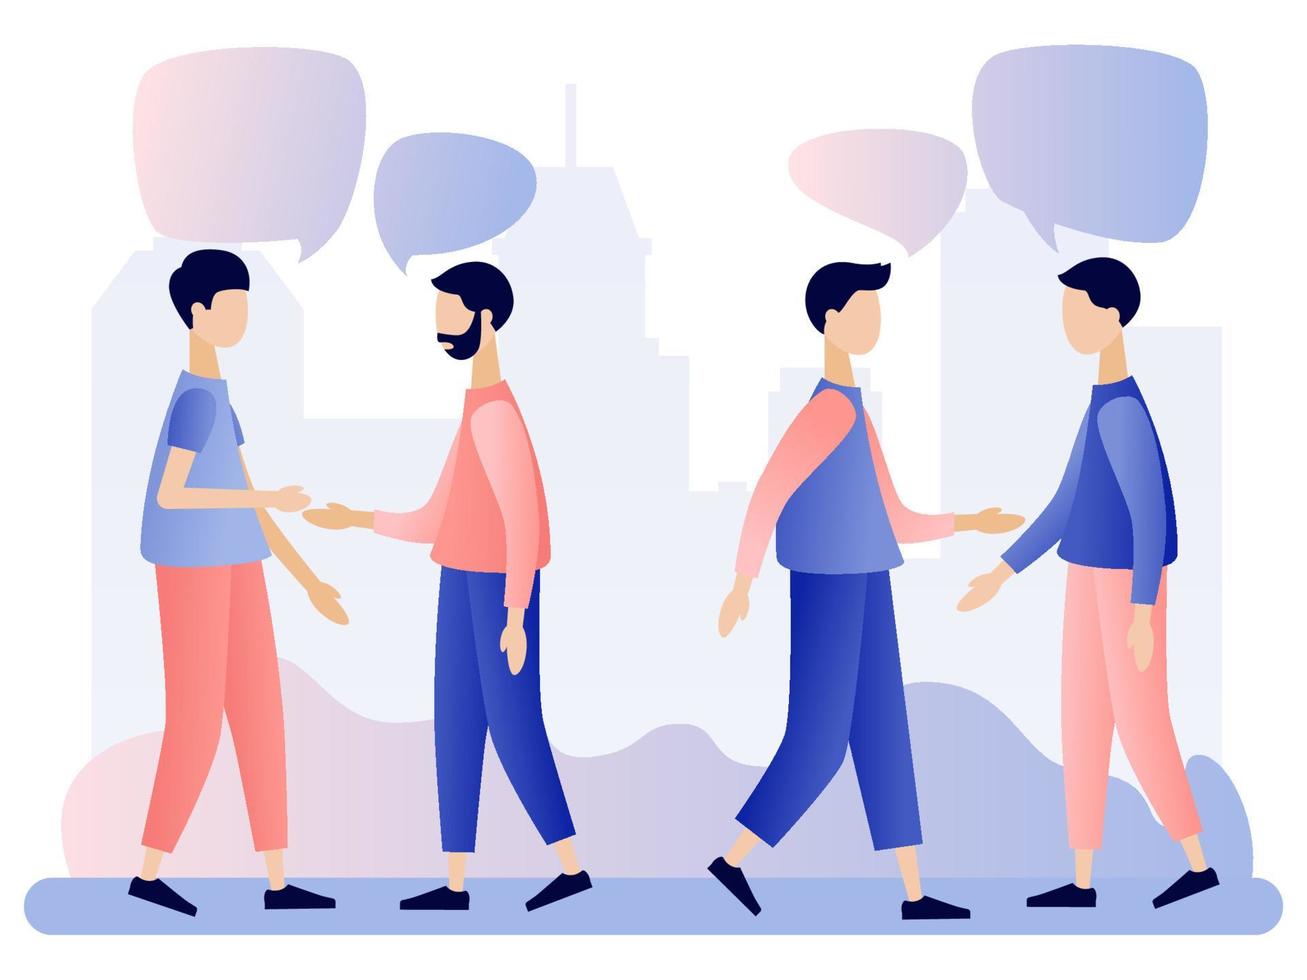 Men talking. People discuss social network, news, social networks, chat, dialogue speech bubbles.Flat style. Vector illustration